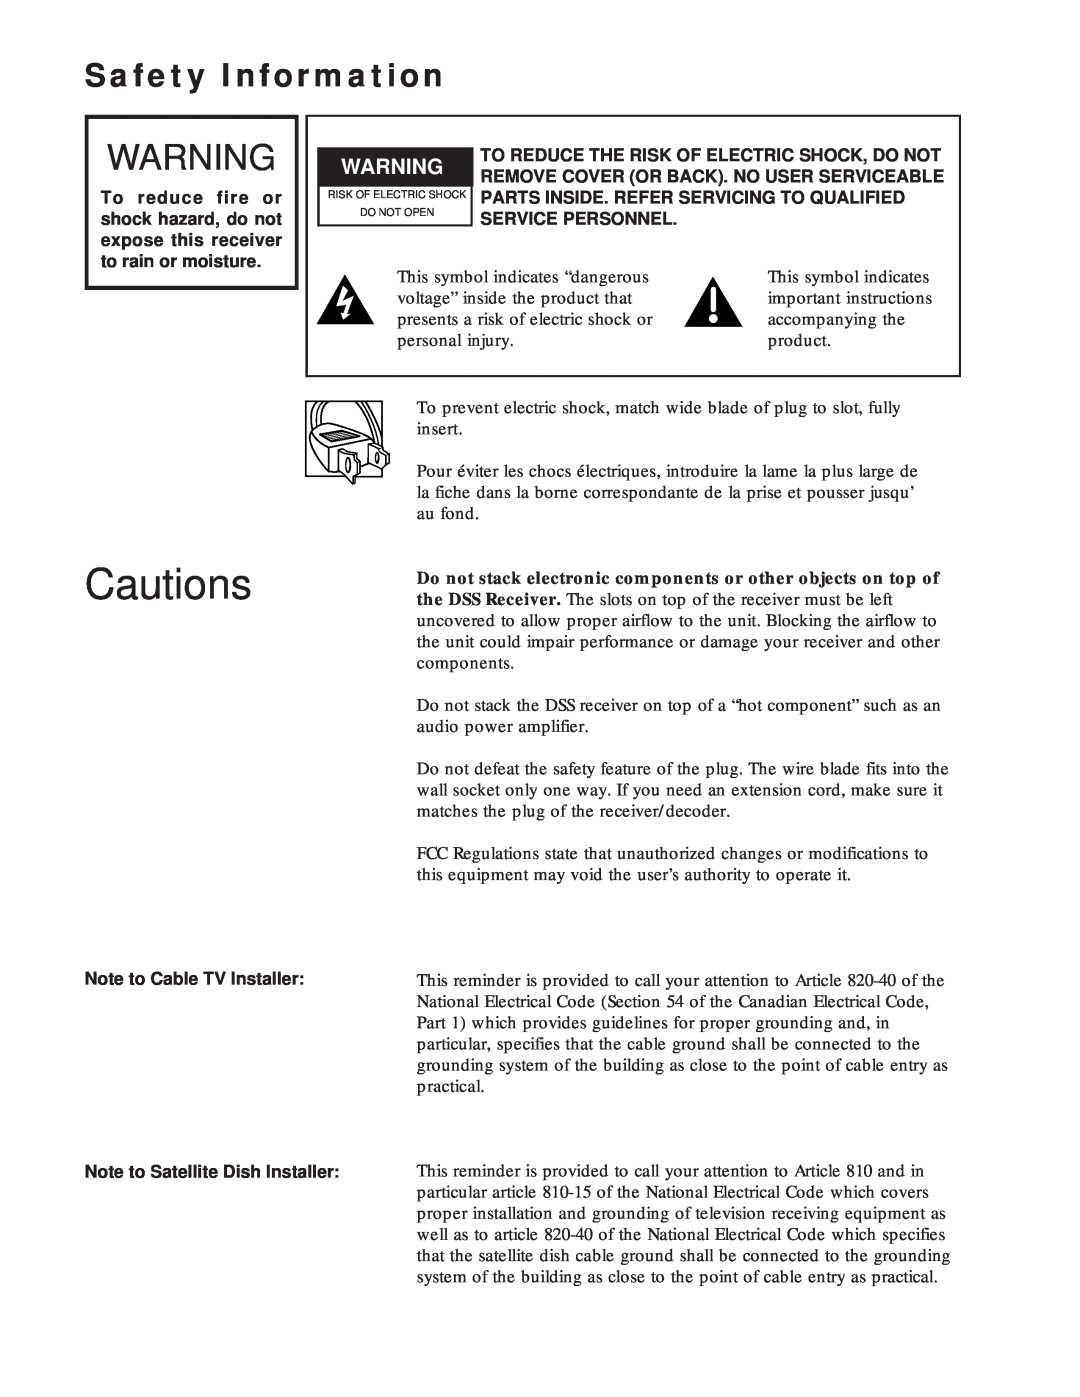 RCA DRD212NW Safety Information, Cautions, Note to Cable TV Installer, To Reduce The Risk Of Electric Shock, Do Not 